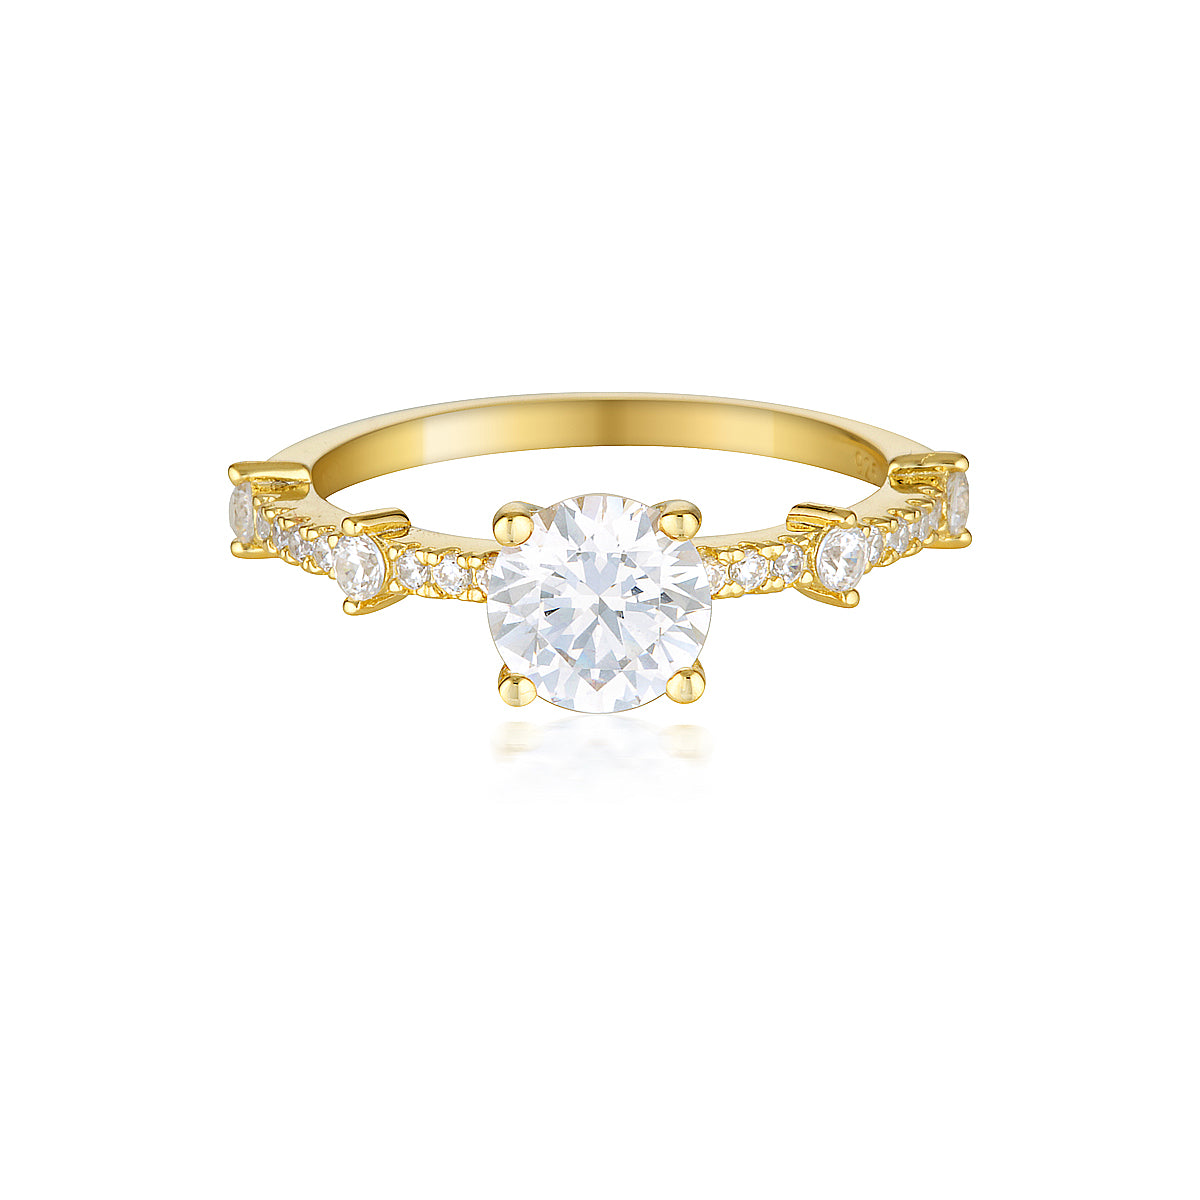 RED CARPET GALA SOLITAIRE RING GOLD